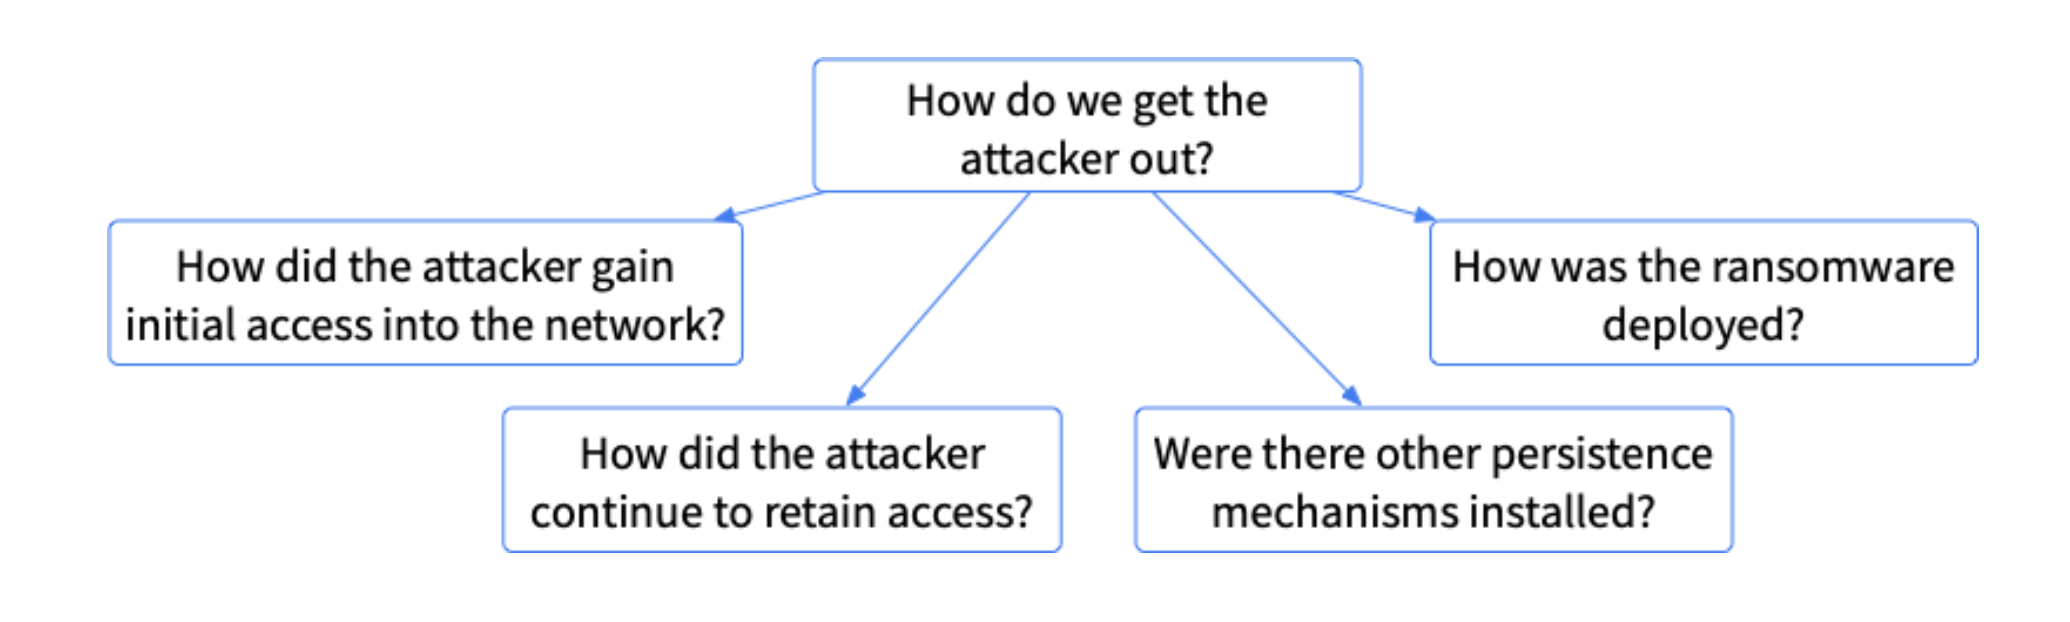 Diagram of questions relating to getting the attacker out